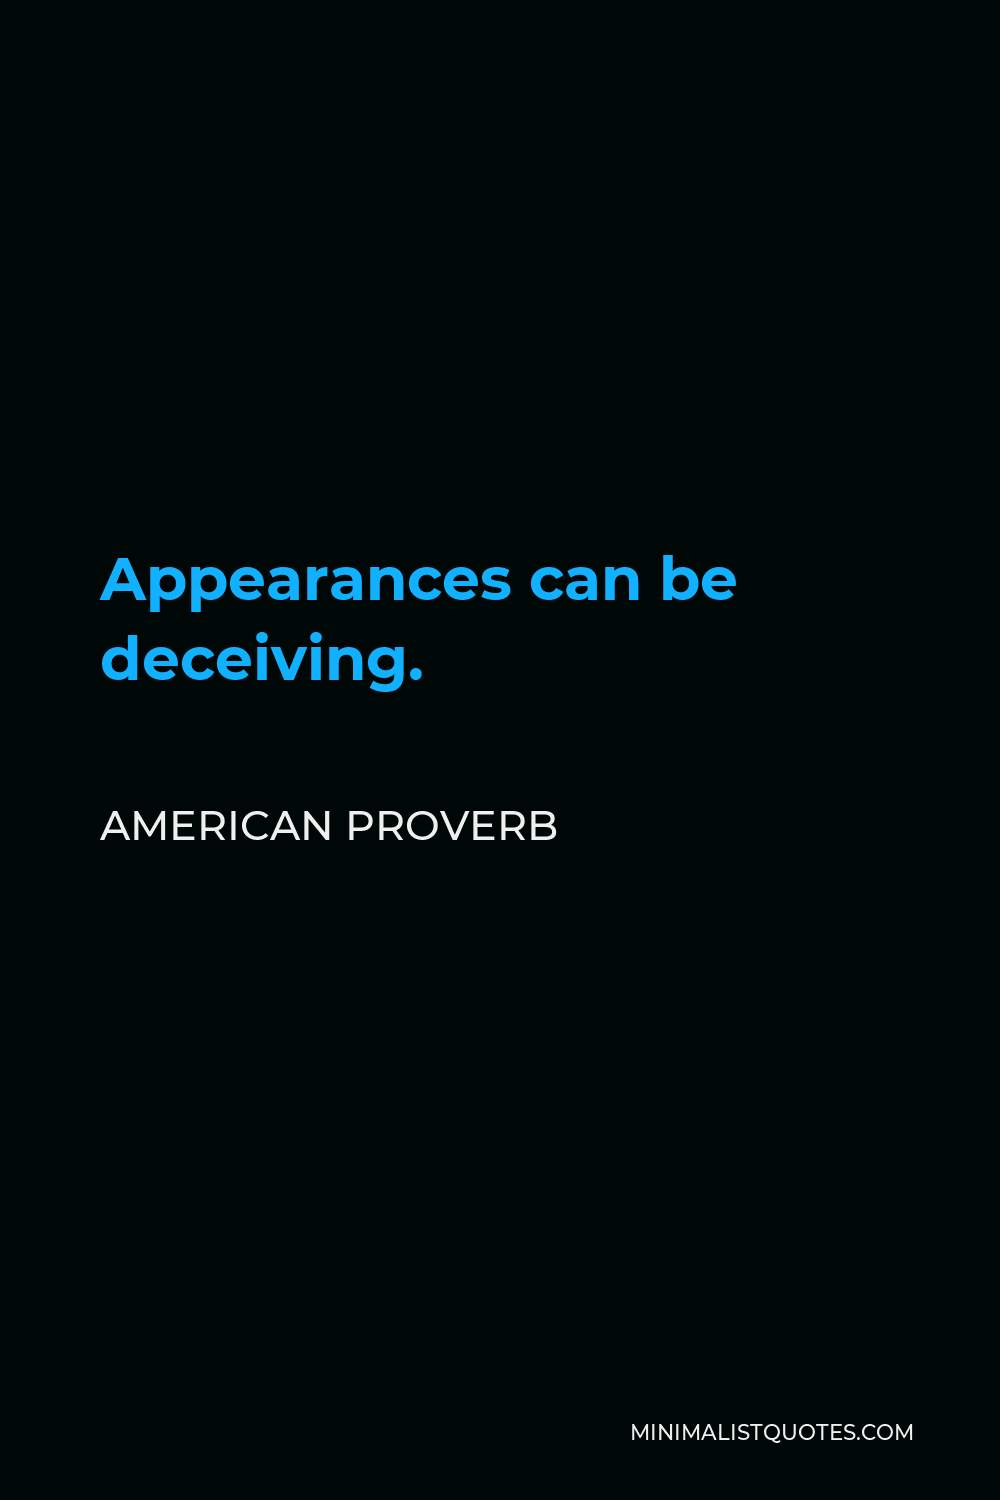 American Proverb Quote - Appearances can be deceiving.